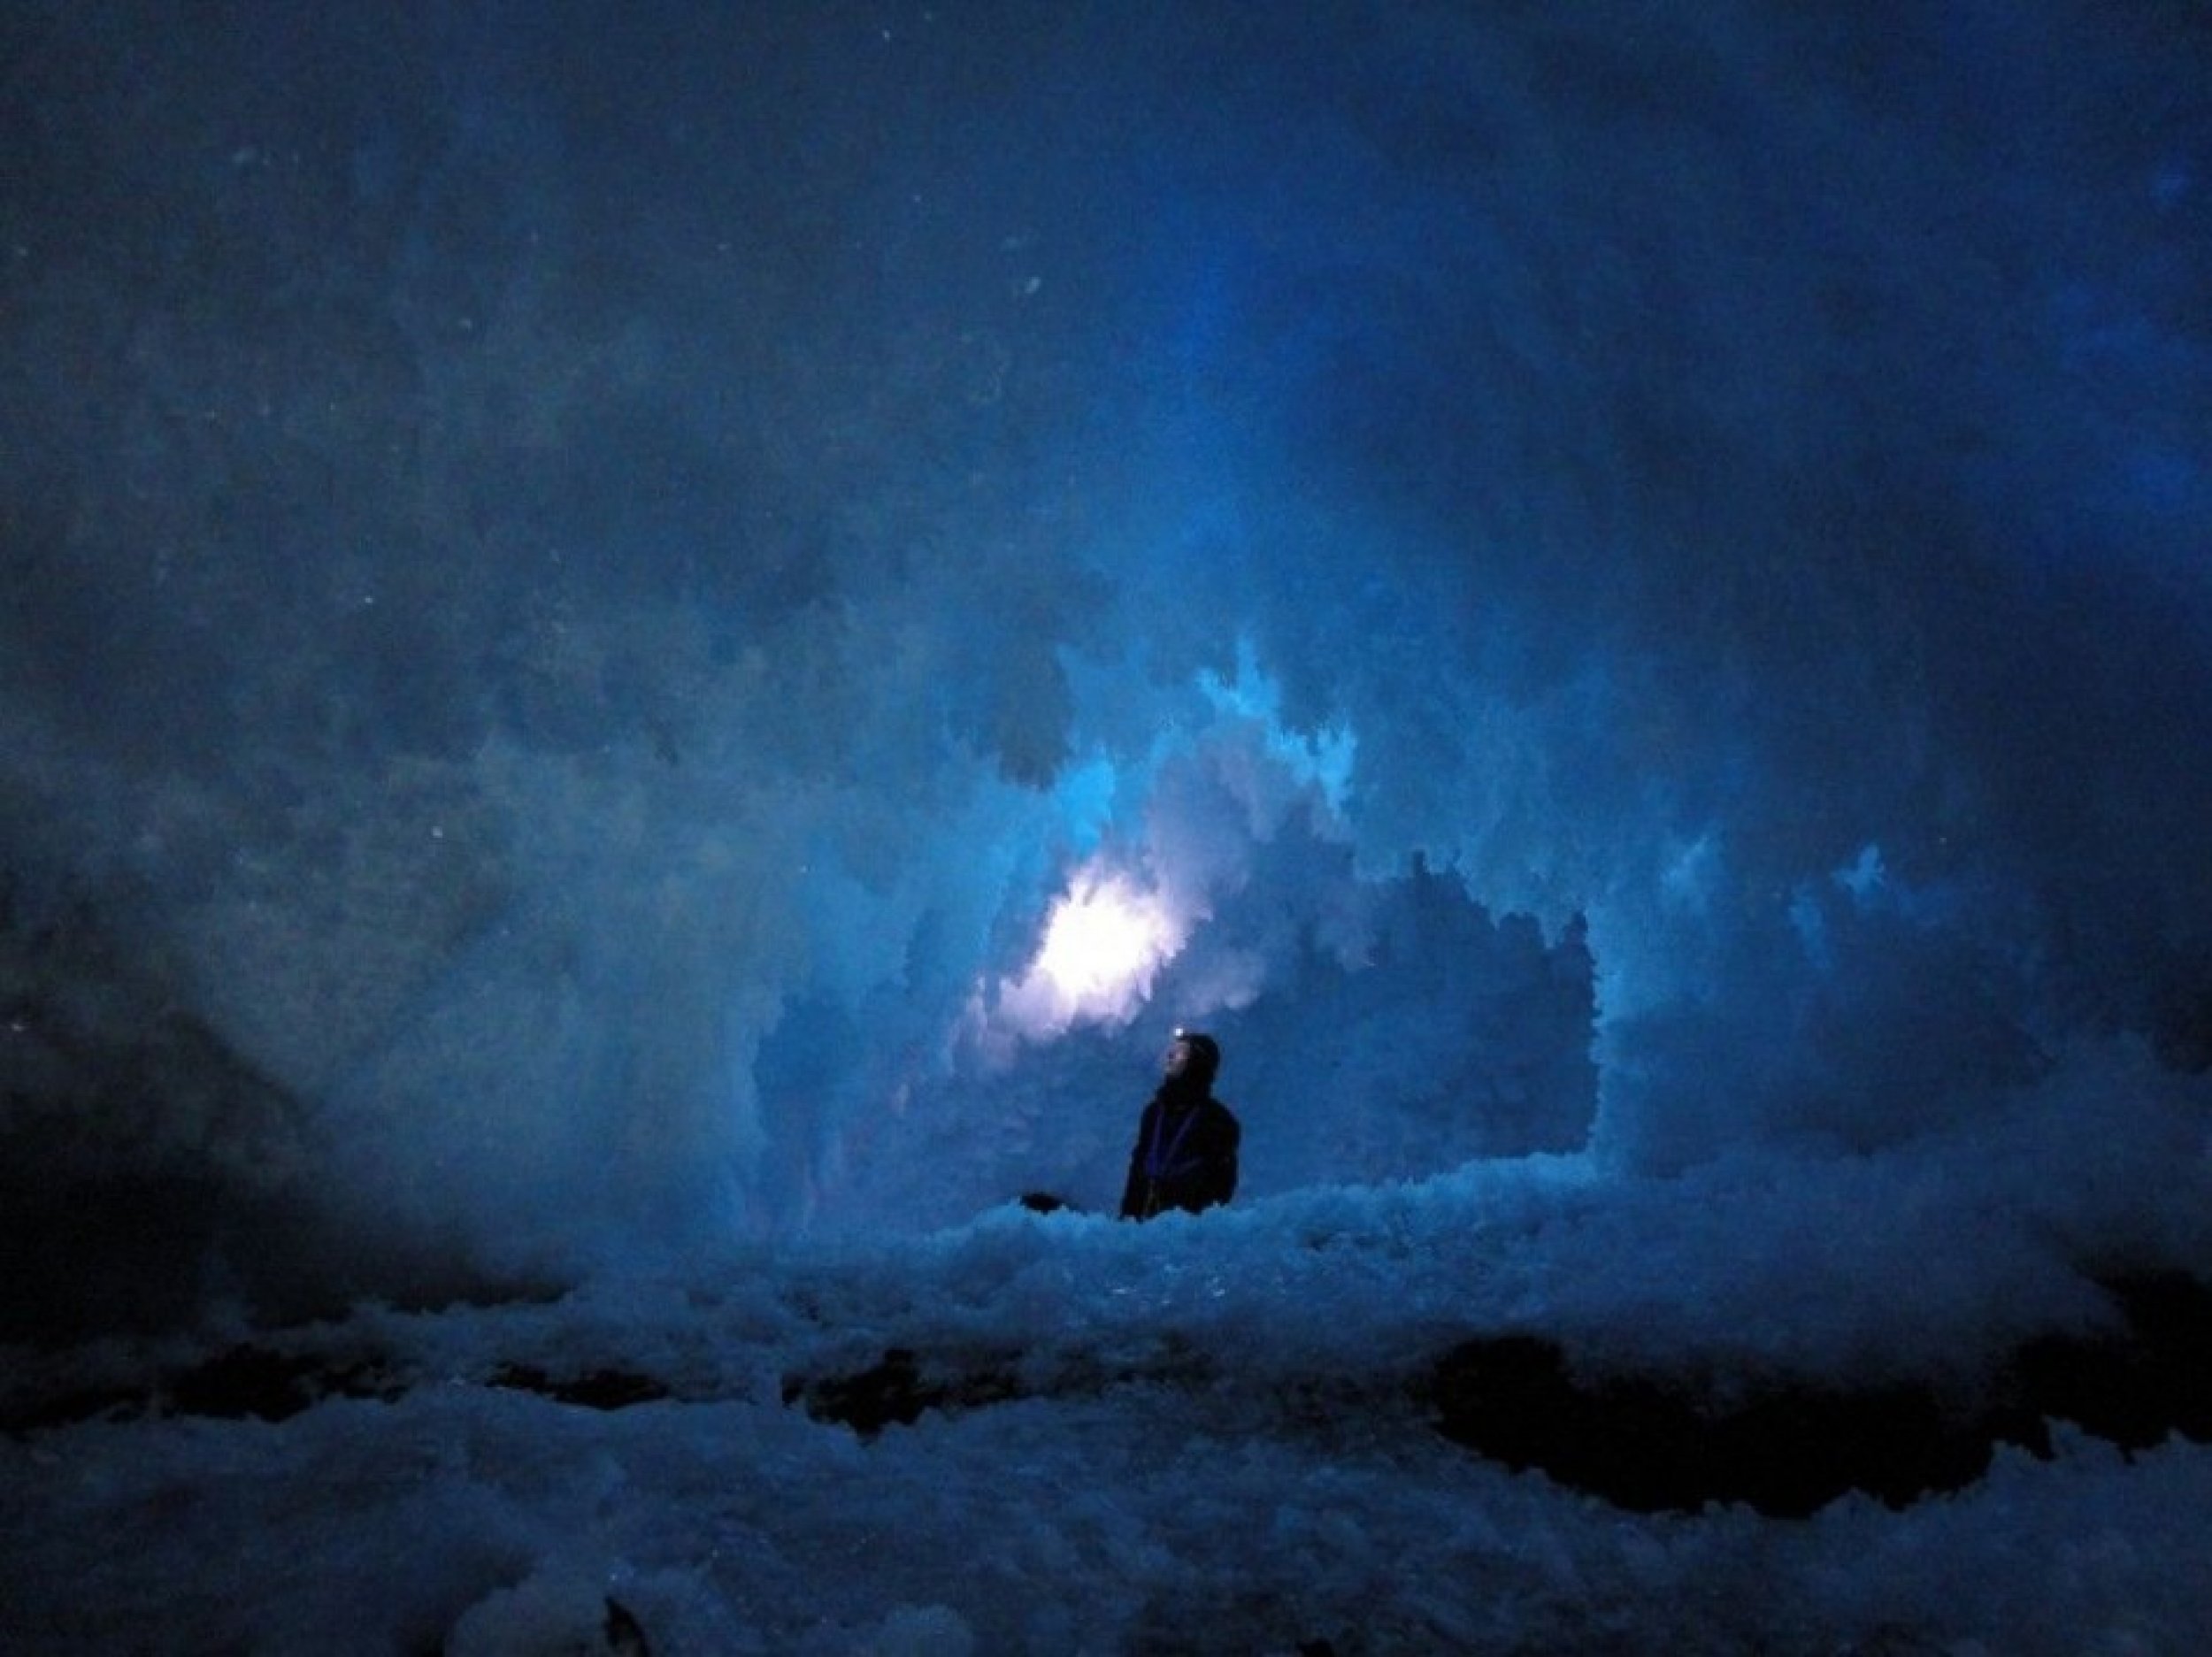 Stunning Images of Ice Caves on Antarcticas Active Volcano Mt. Erebus Revealed